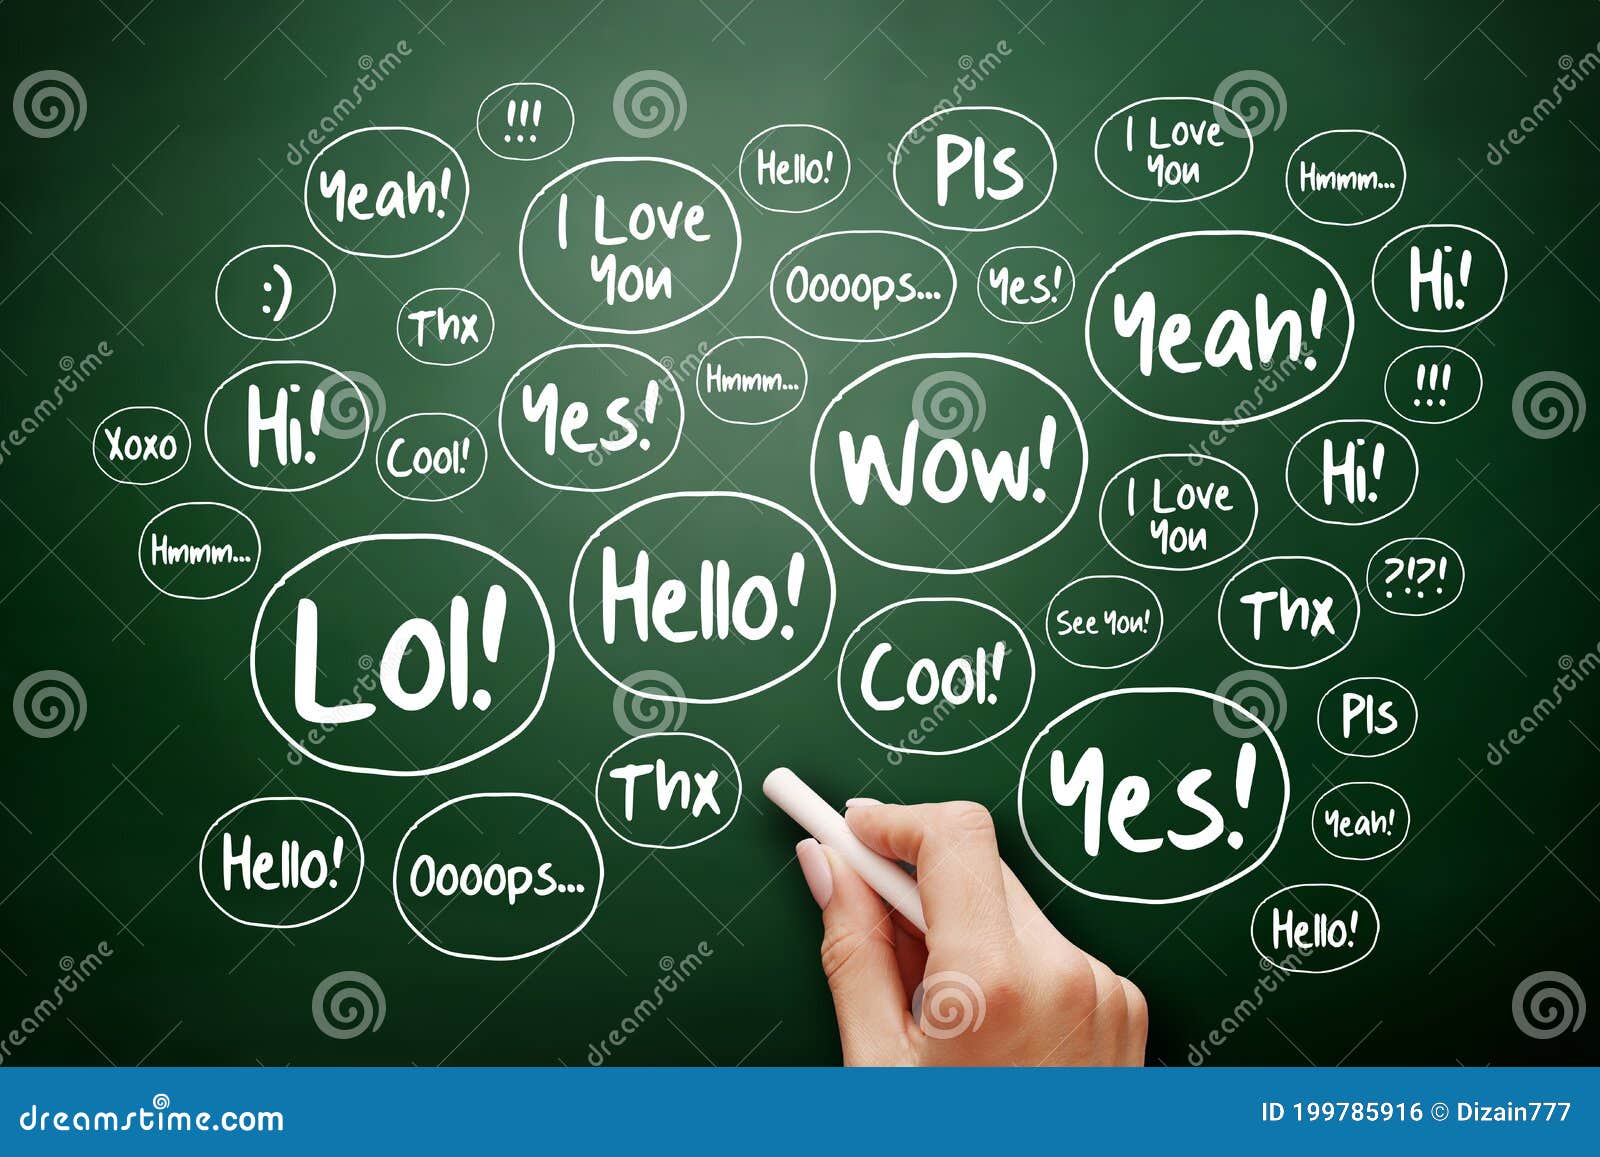 4+ Thousand Chat Abbreviations Royalty-Free Images, Stock Photos & Pictures